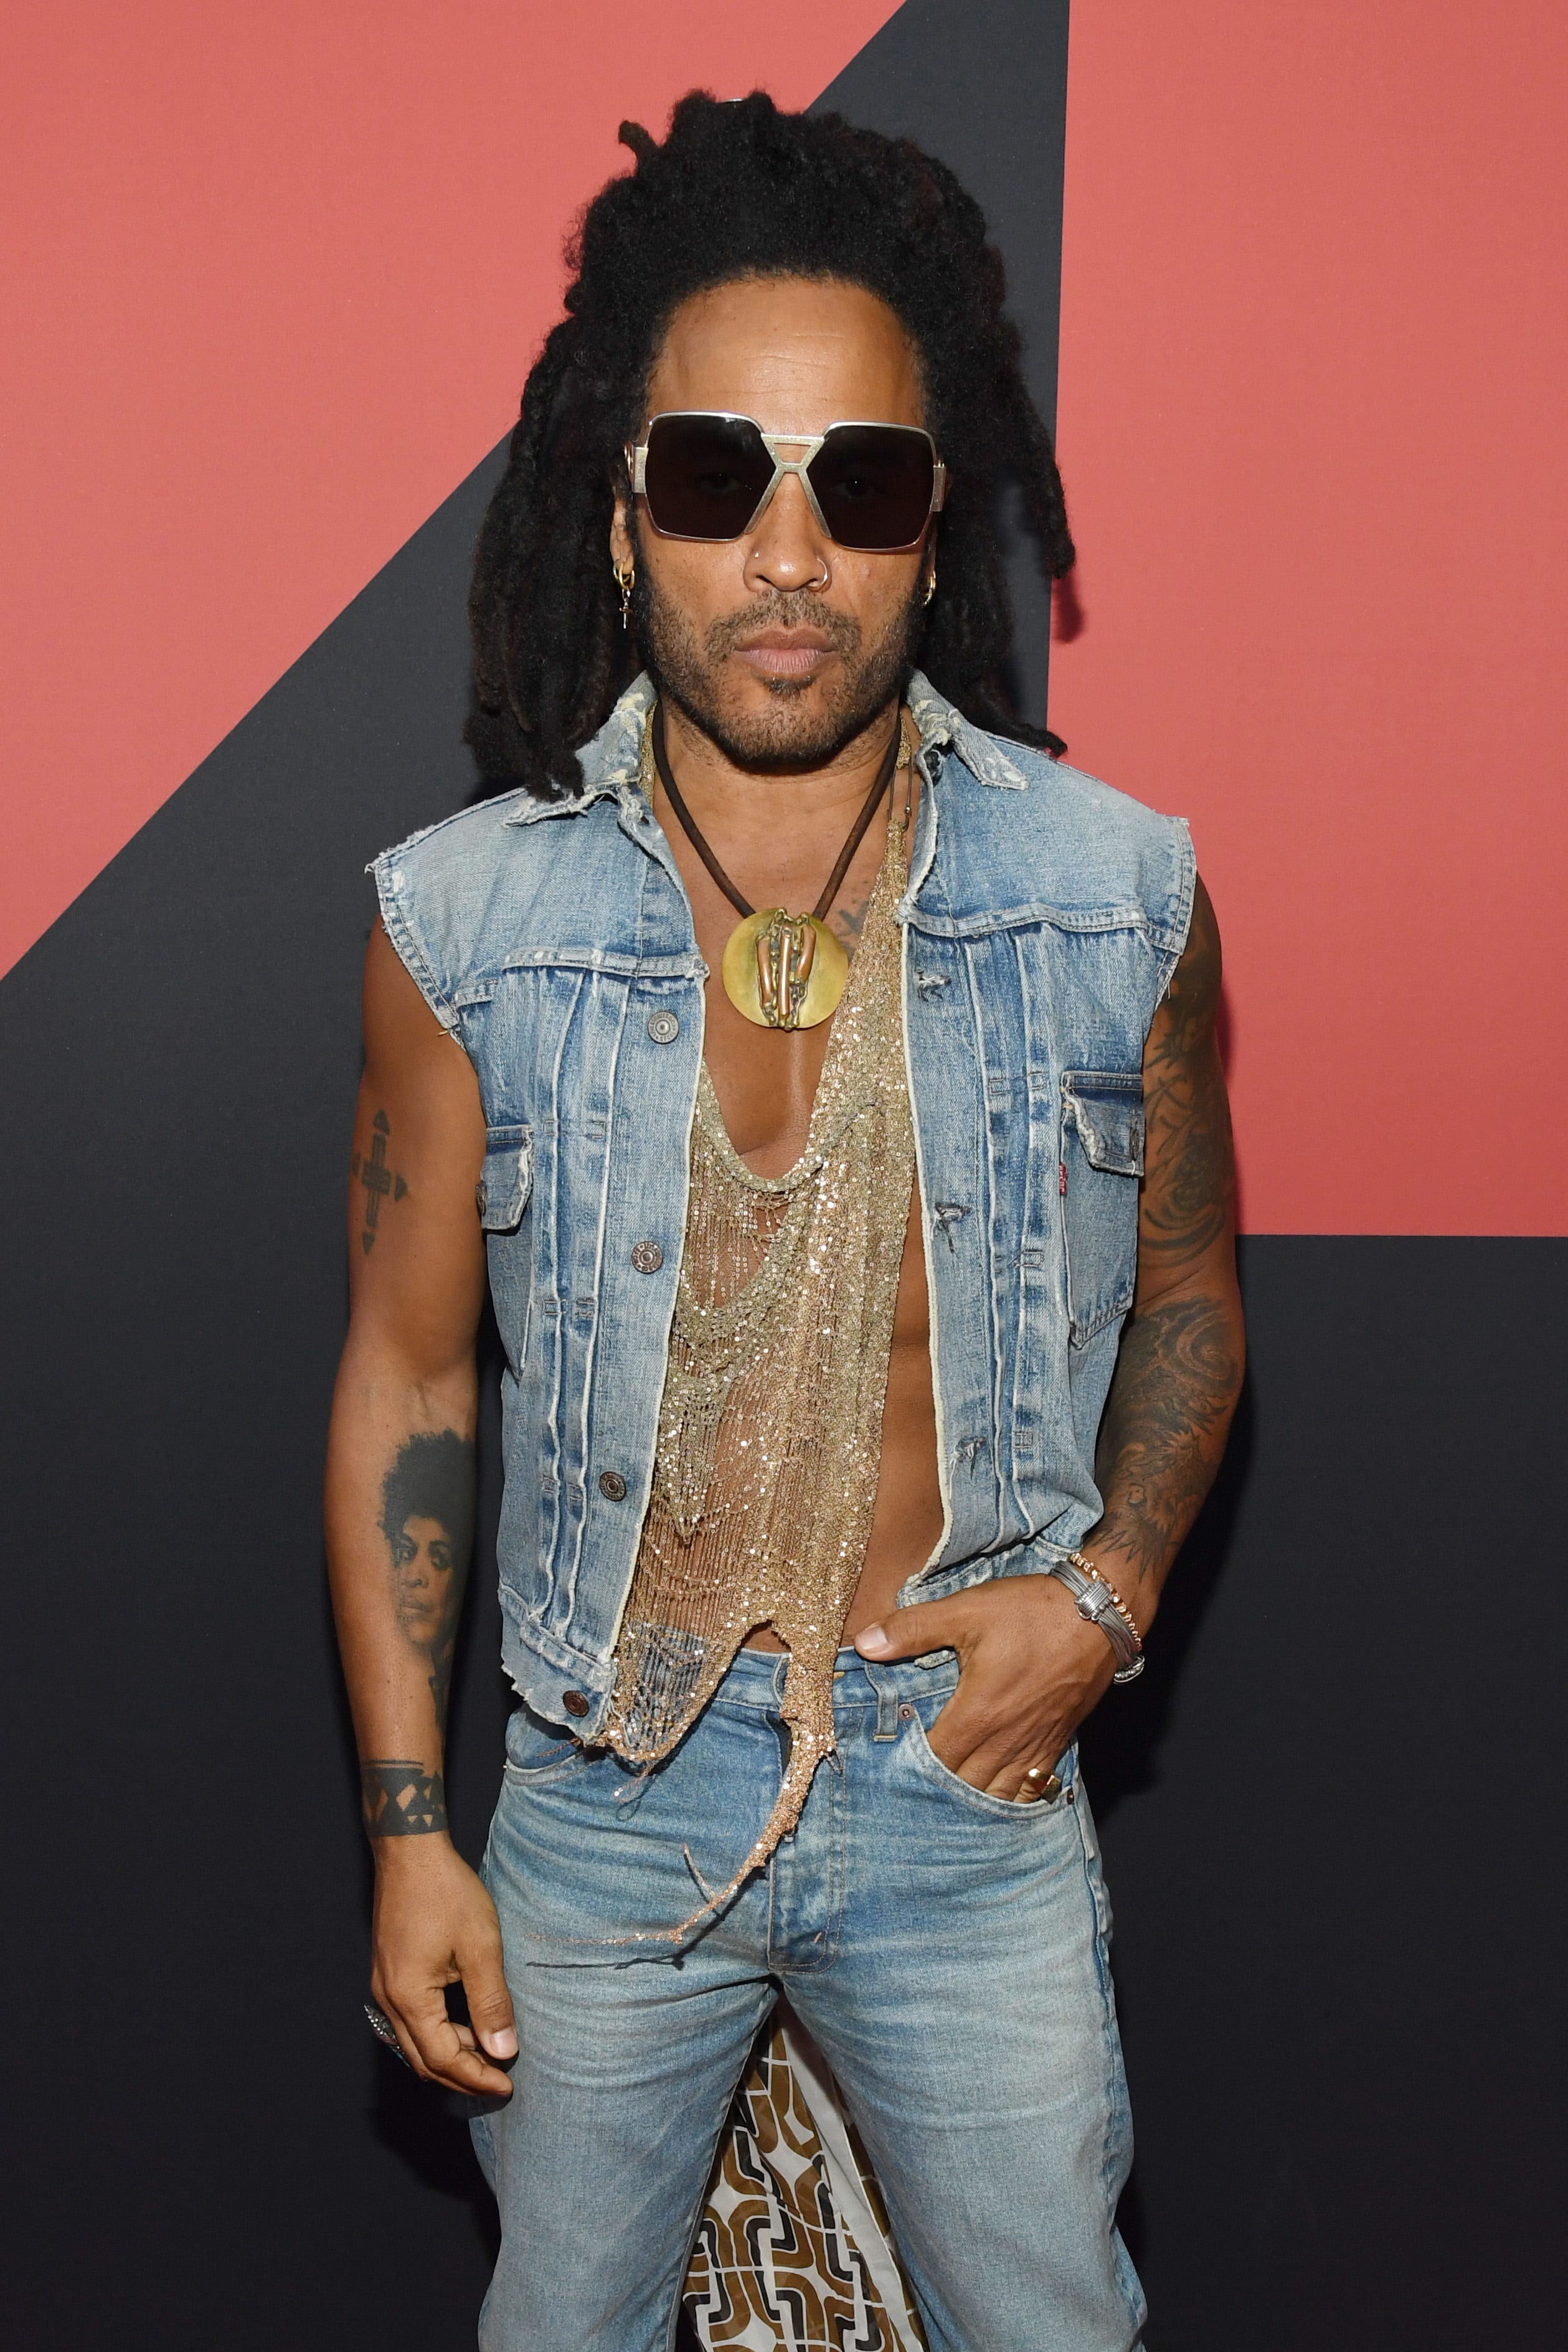 Who has Lenny Kravitz dated? Girlfriend List, Dating History